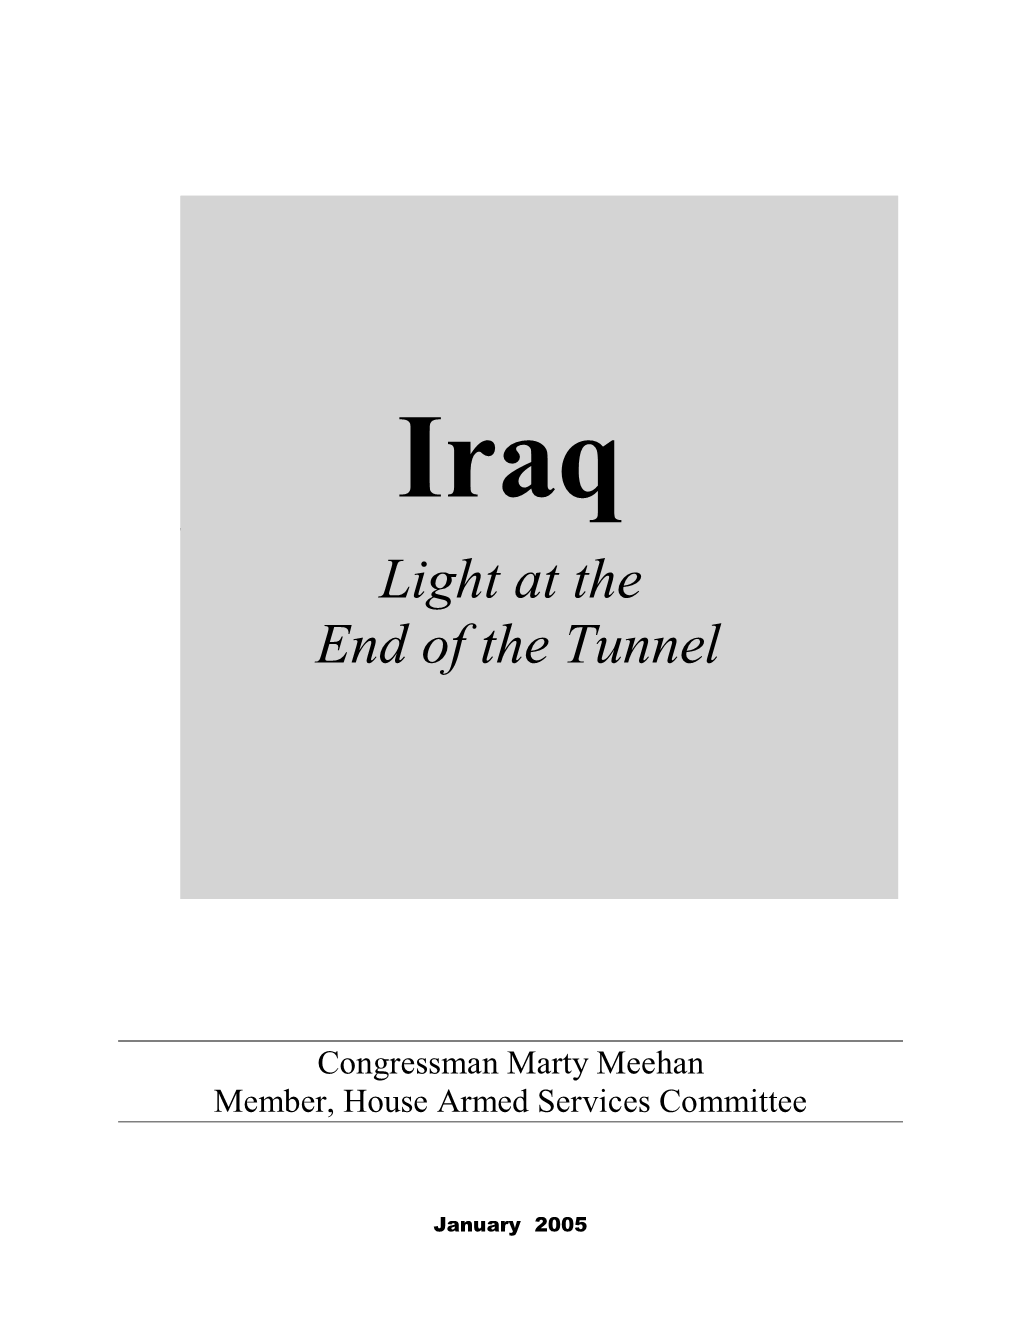 Iraq Light at the End of the Tunnel